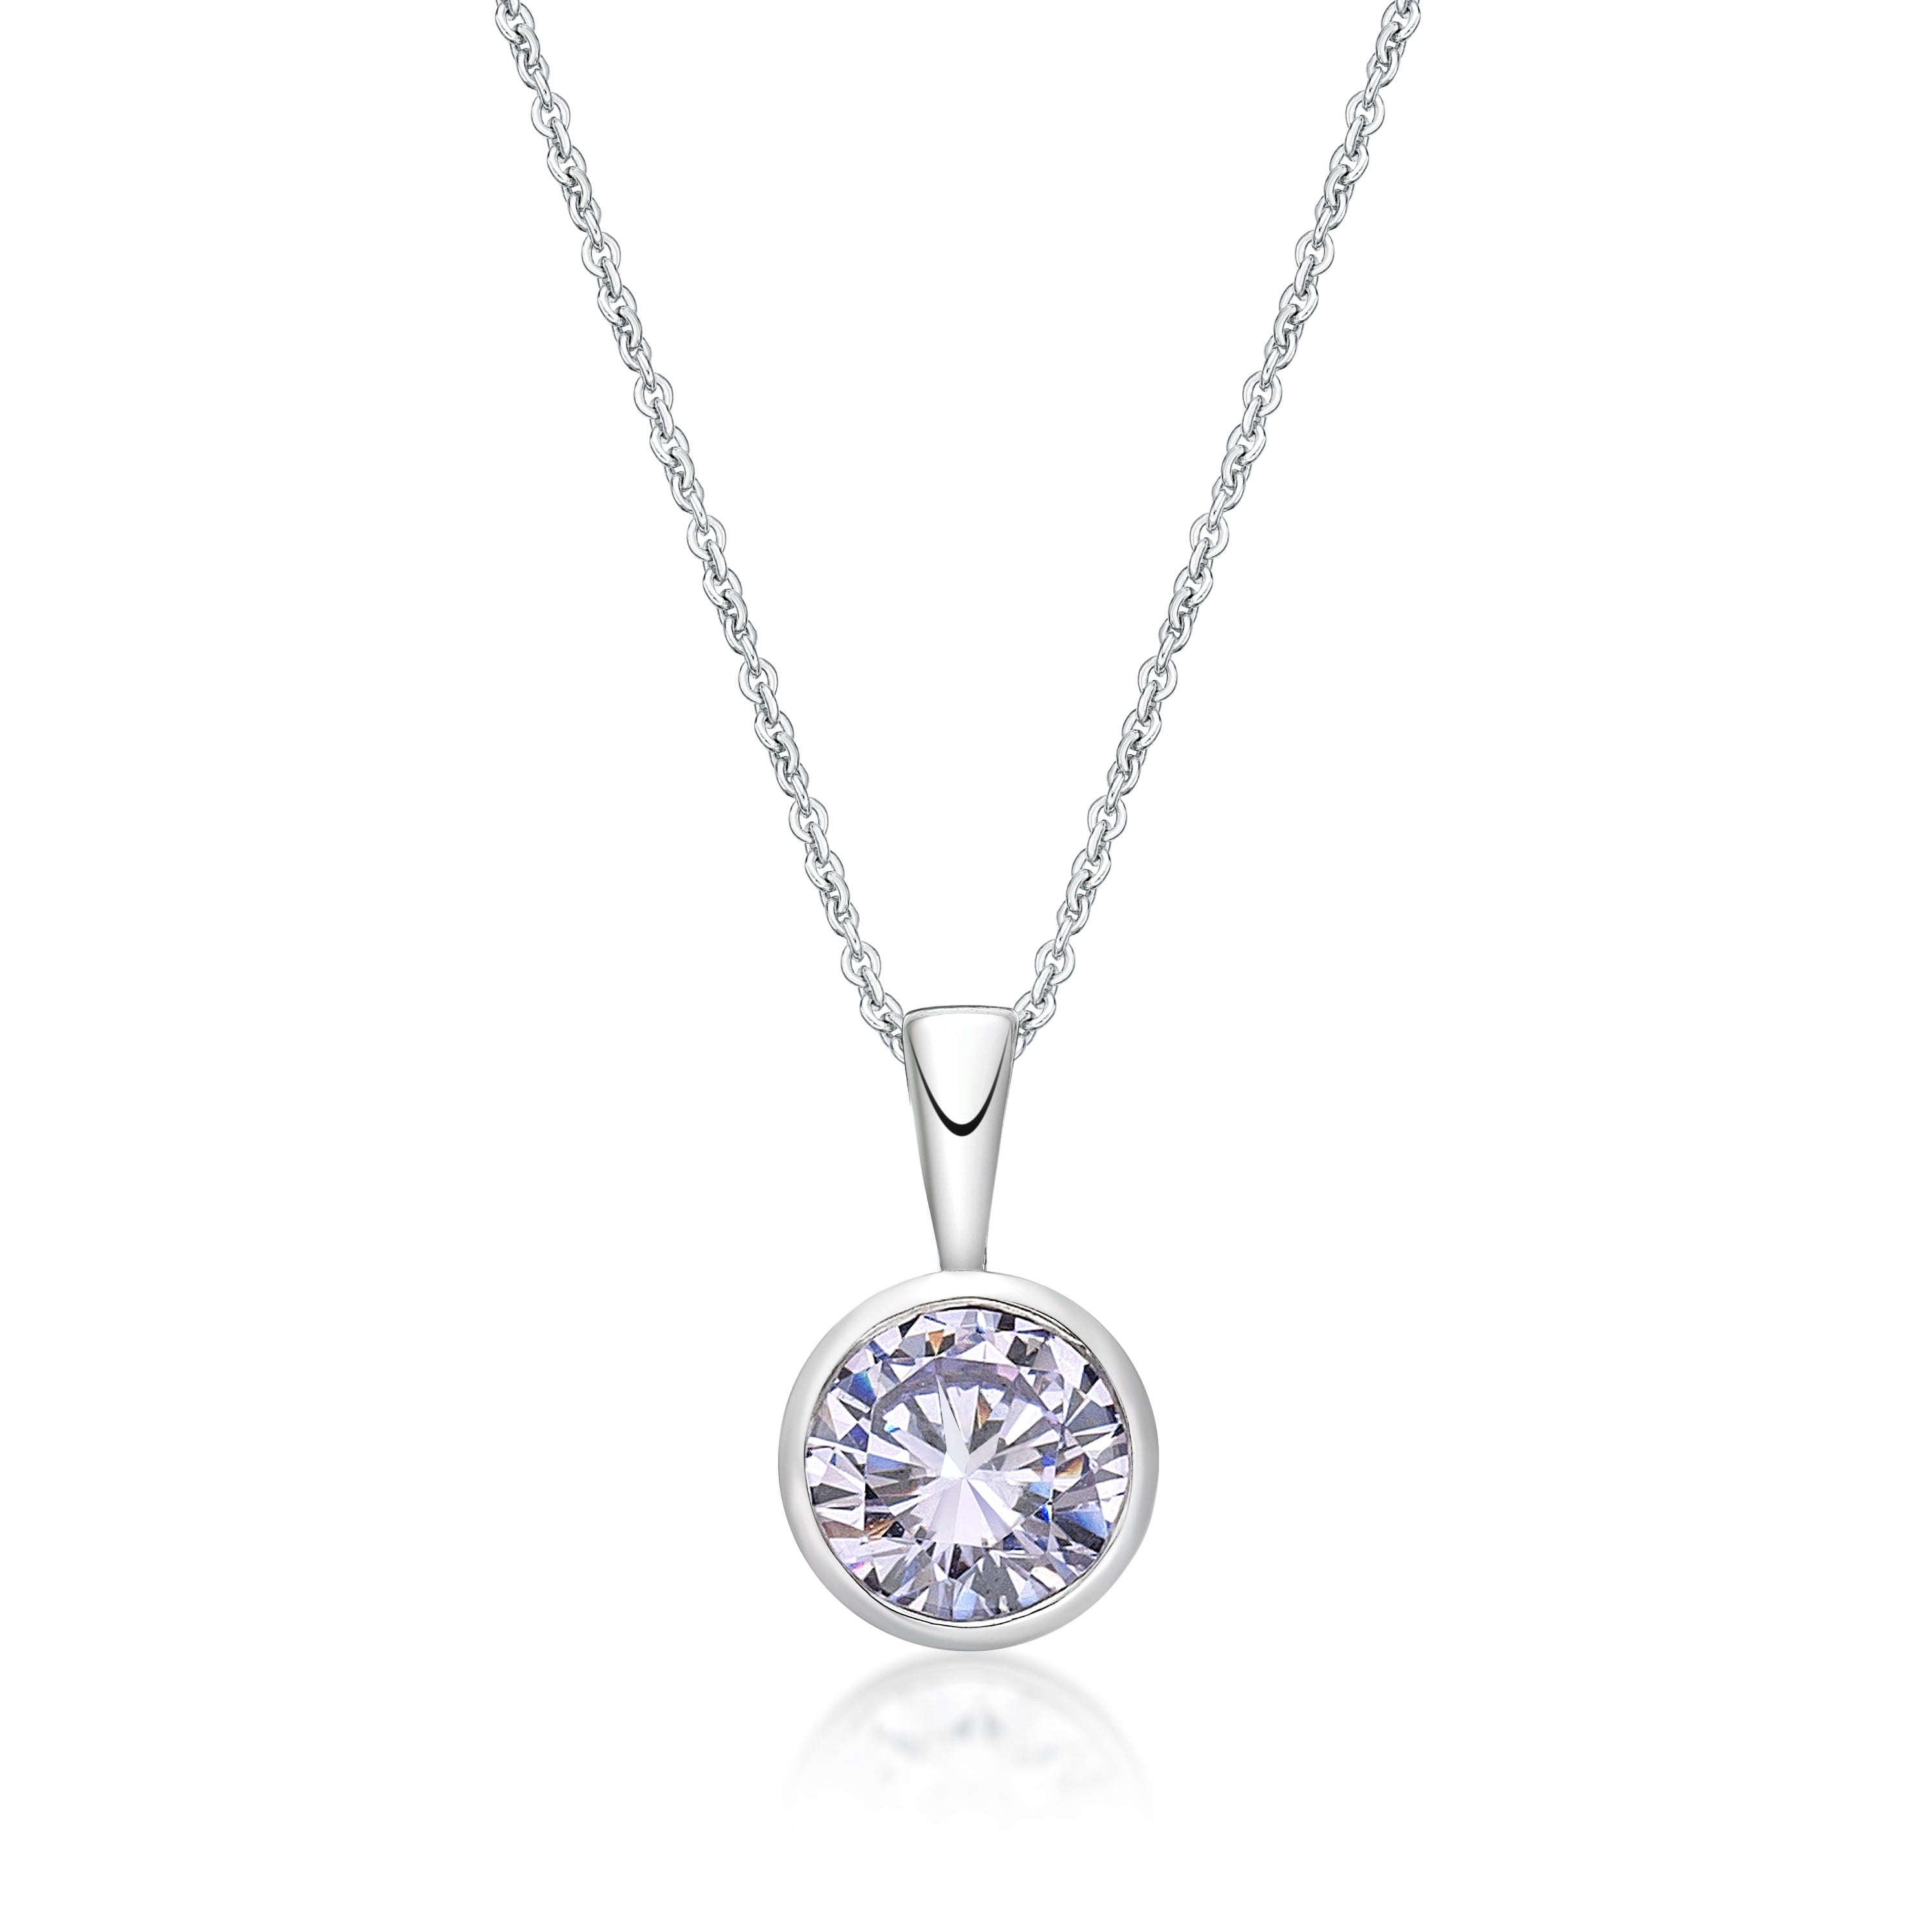 Sterling Silver April Birthstone Pendant and Chain